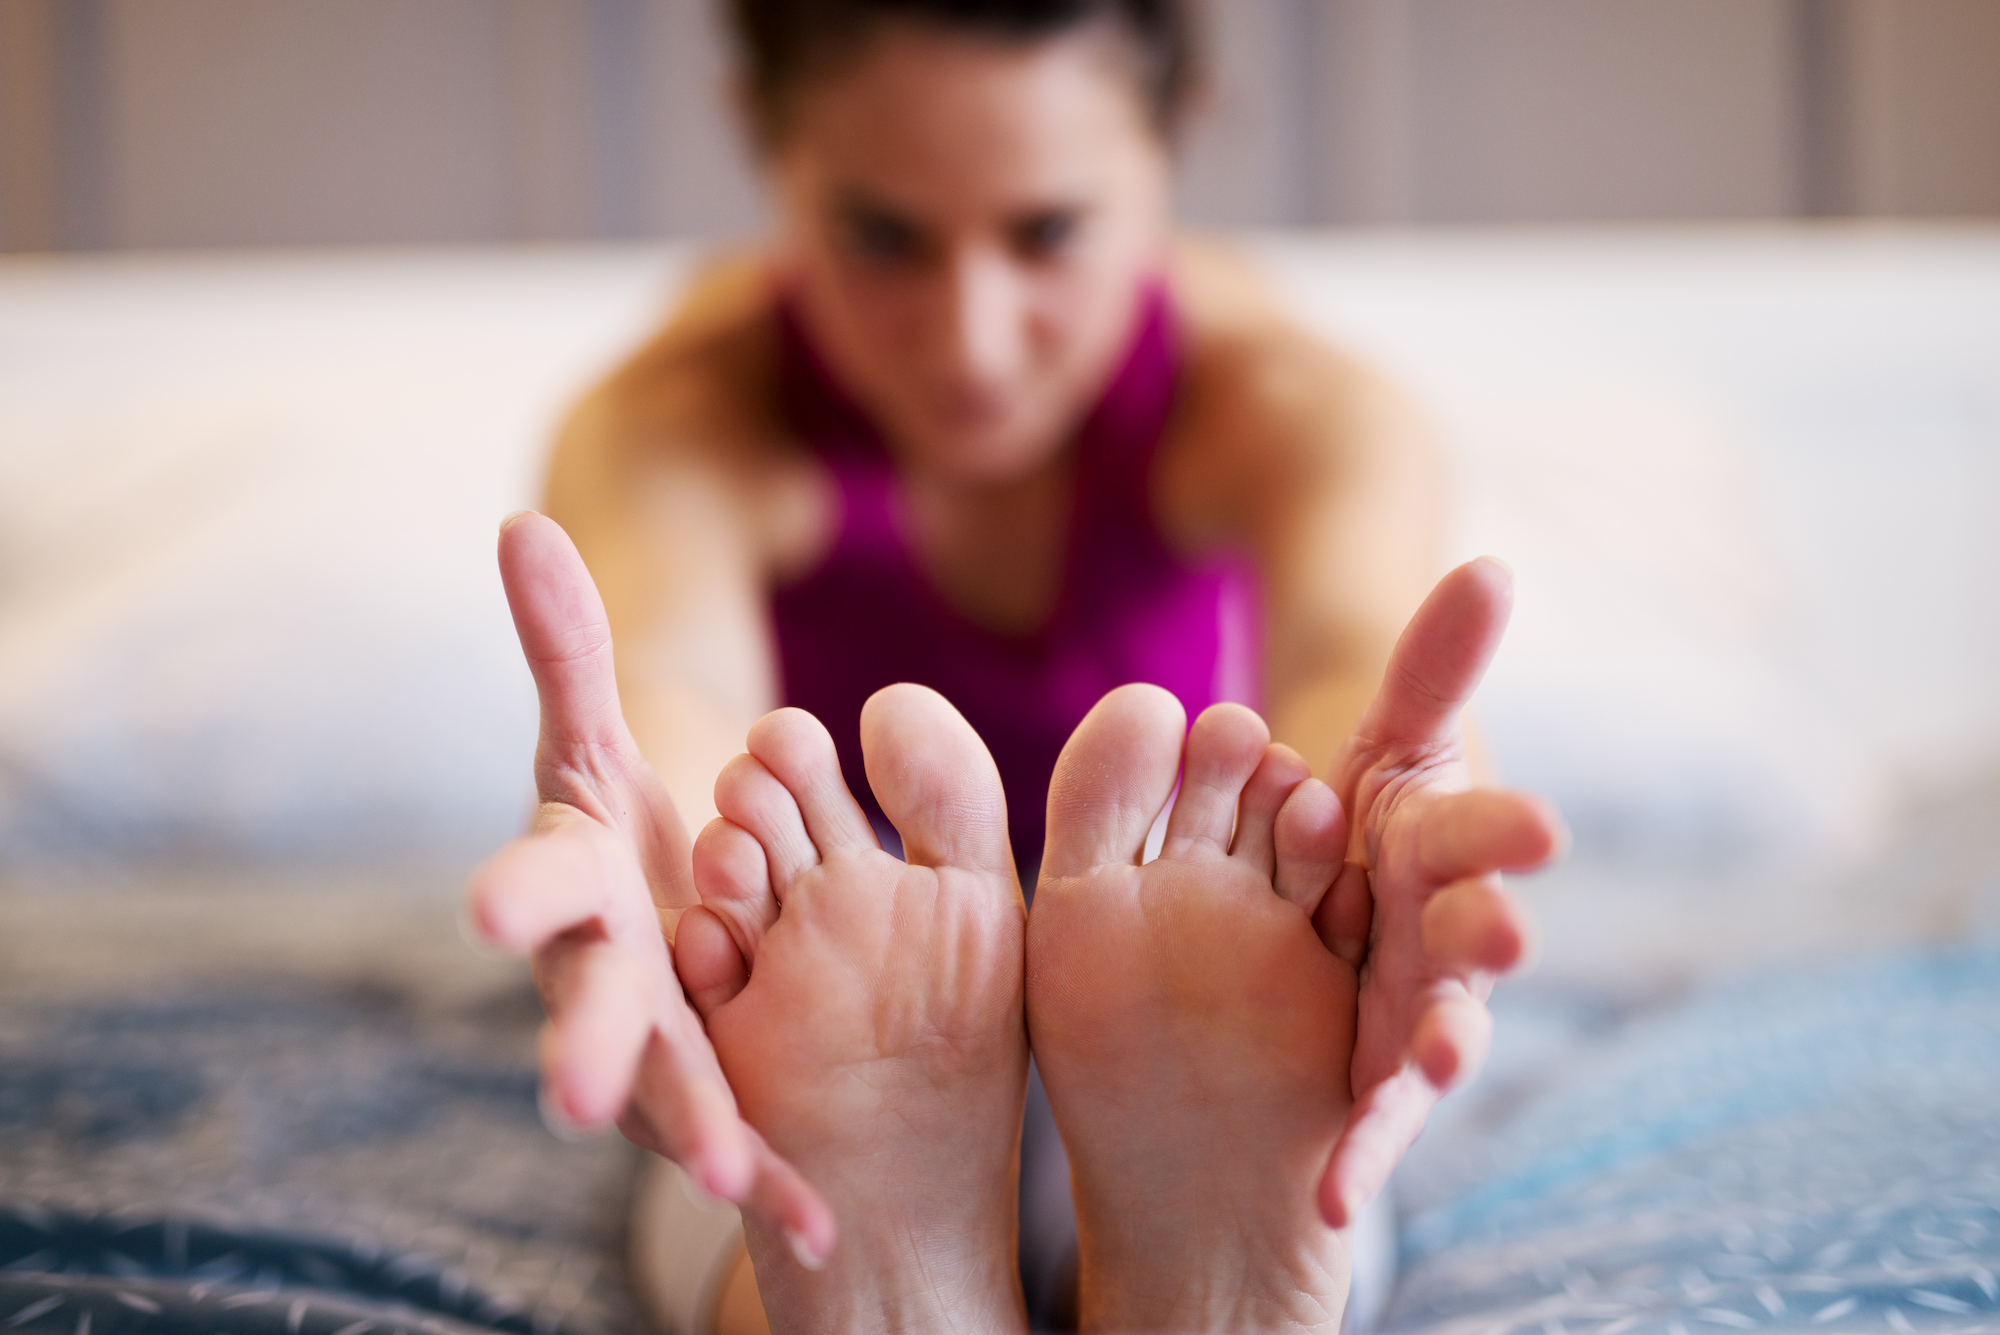 Middle aged woman stretching yoga exercise while sitting forward on the bed while her hands are holding the feets. Focus on the feets and hands.